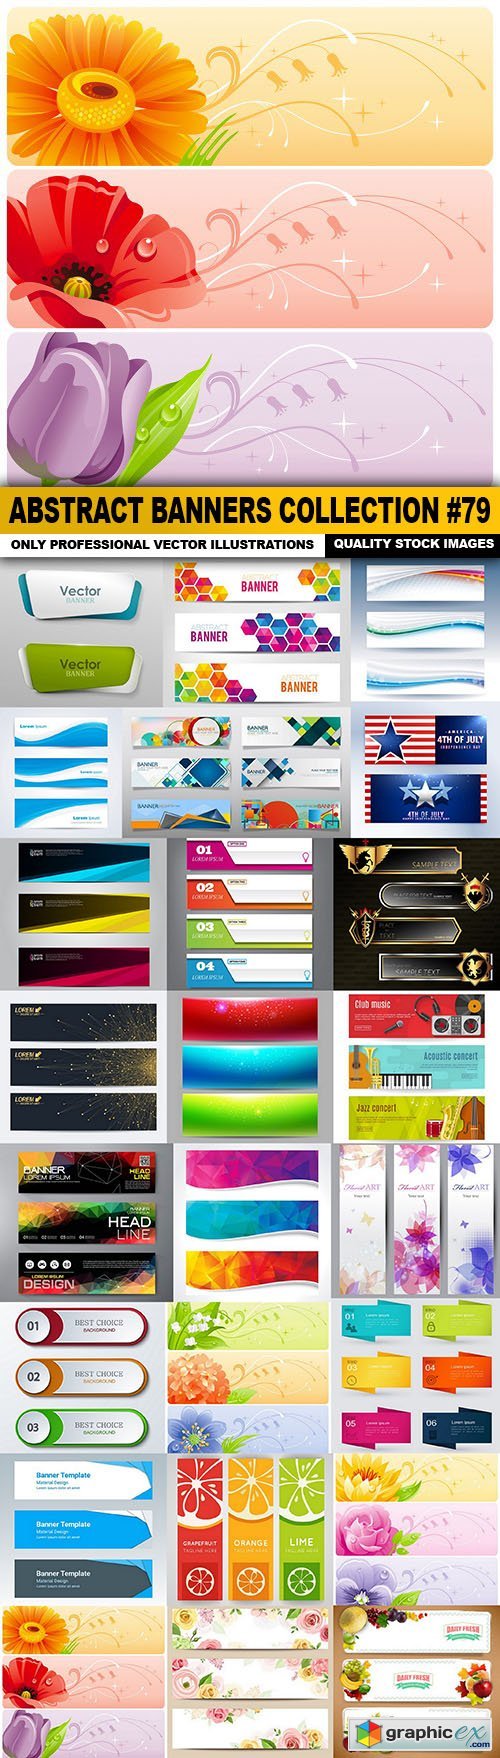 Abstract Banners Collection #79